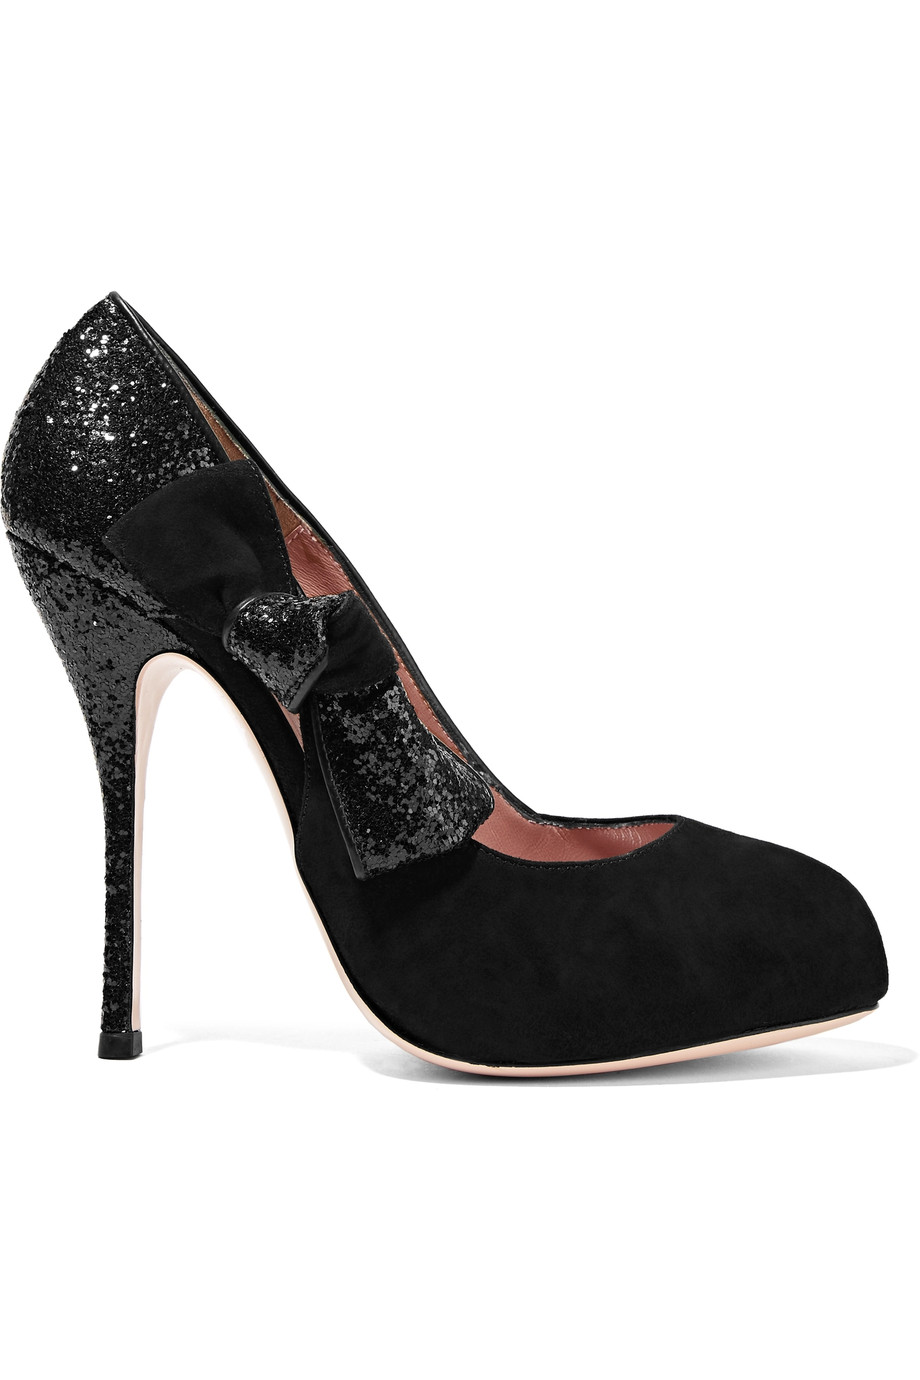 Red Valentino Bow-embellished Glittered Suede Pumps | ModeSens